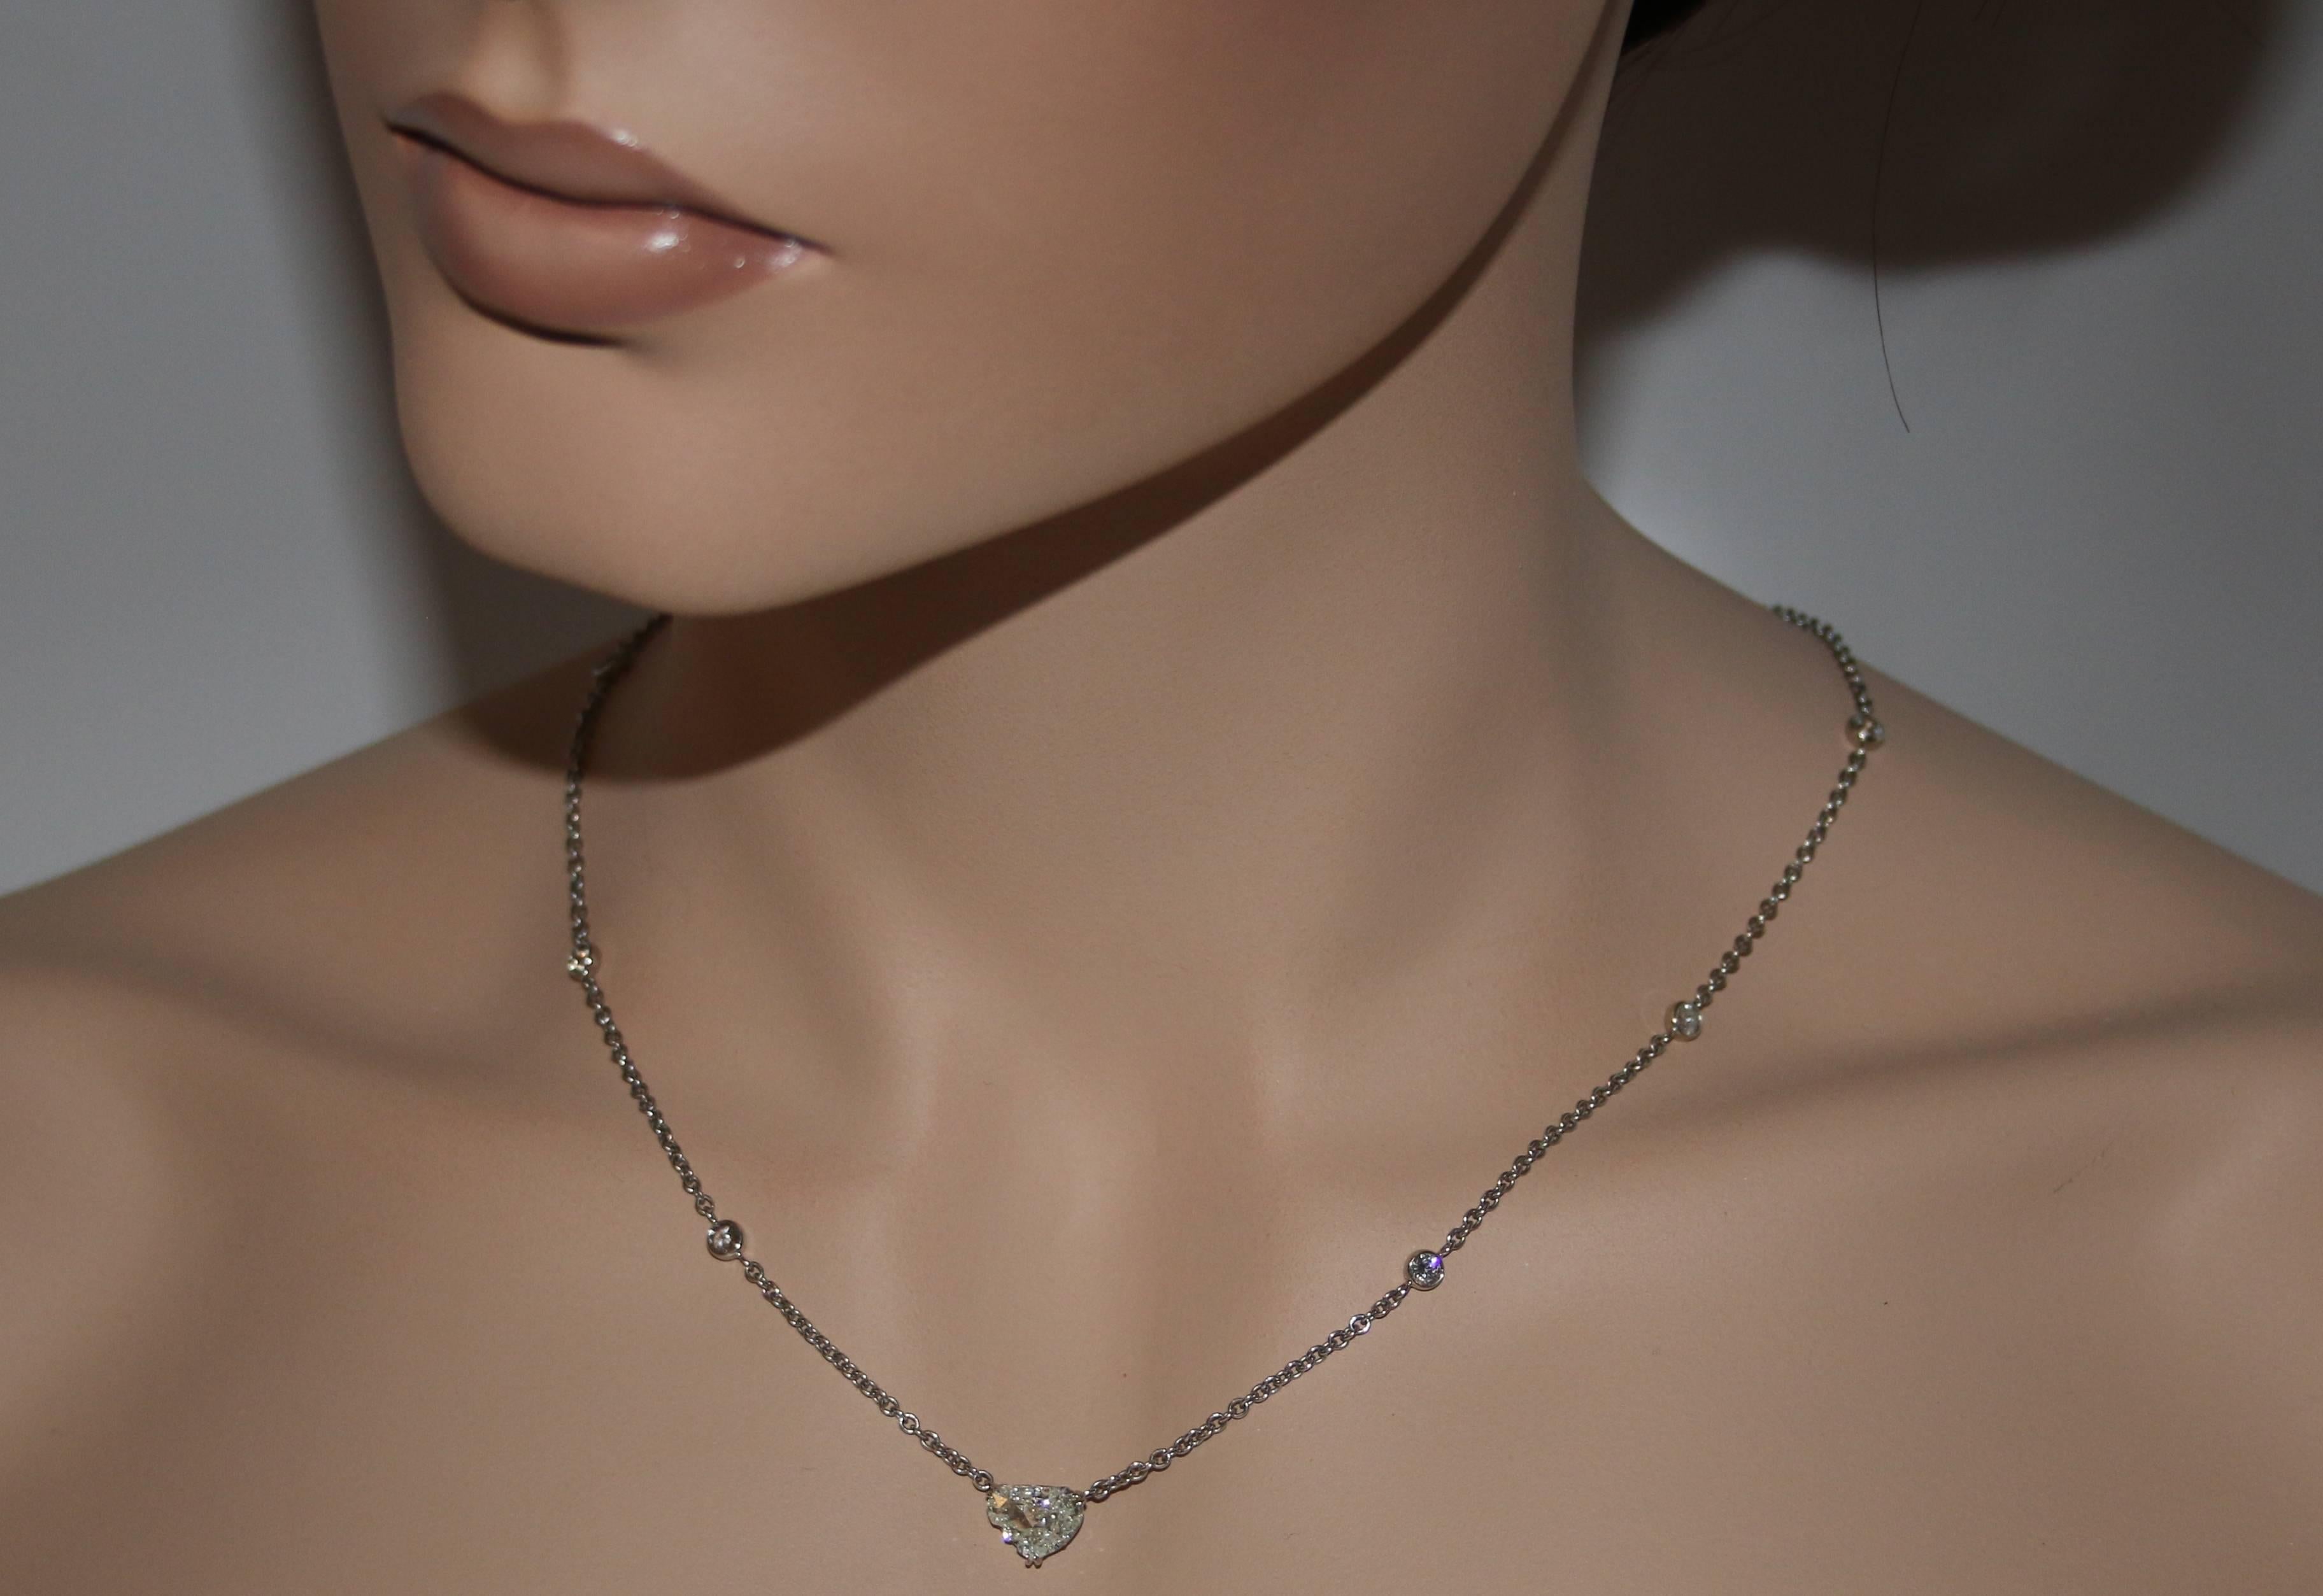 Very Rare and Just One-Of-A-Kind Diamond
The necklace is custom made for the center stone.
The necklace is 18K White Gold
The center stone is GIA Certified Butterfly Cut Diamond
The Butterfly is 1.72 Carats J VS2
The chain has small round Diamonds